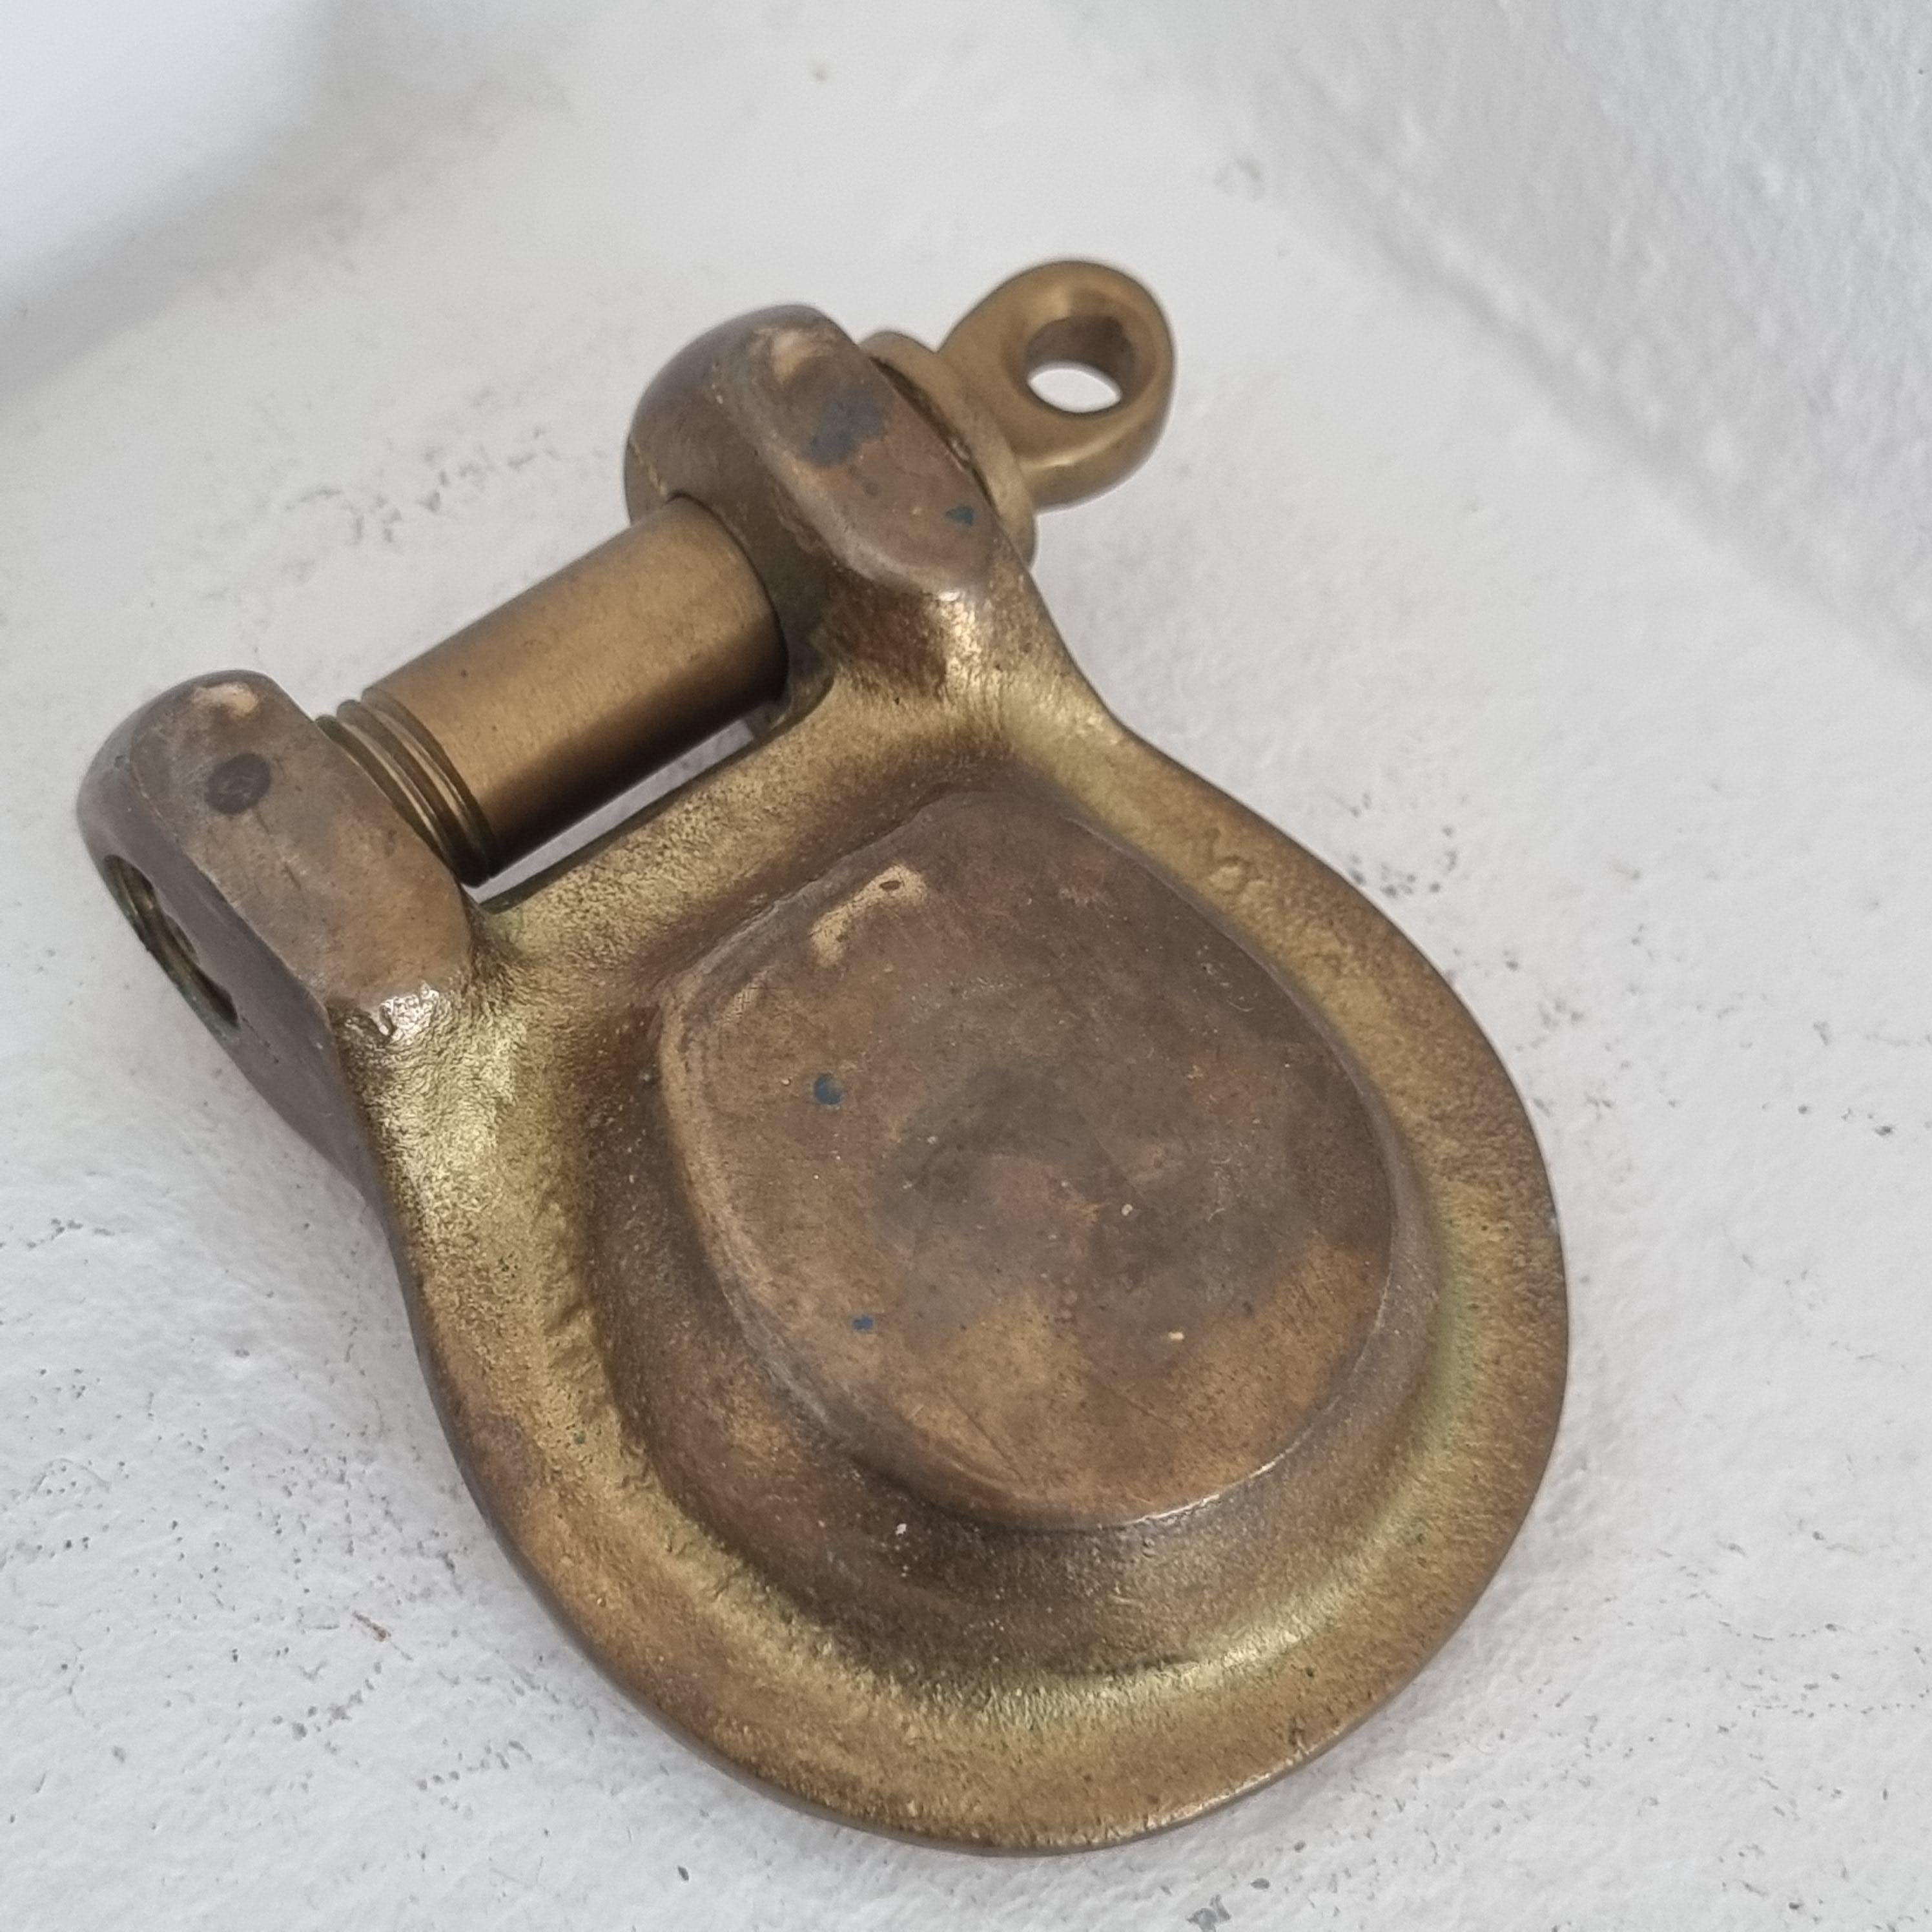 Clevis / Ship´s Shackle Ashtray in solid brass, the screw can be detached. Nautical, 1950/60s

Nice patina, brass with darkened color. Normal signs of age and wear.